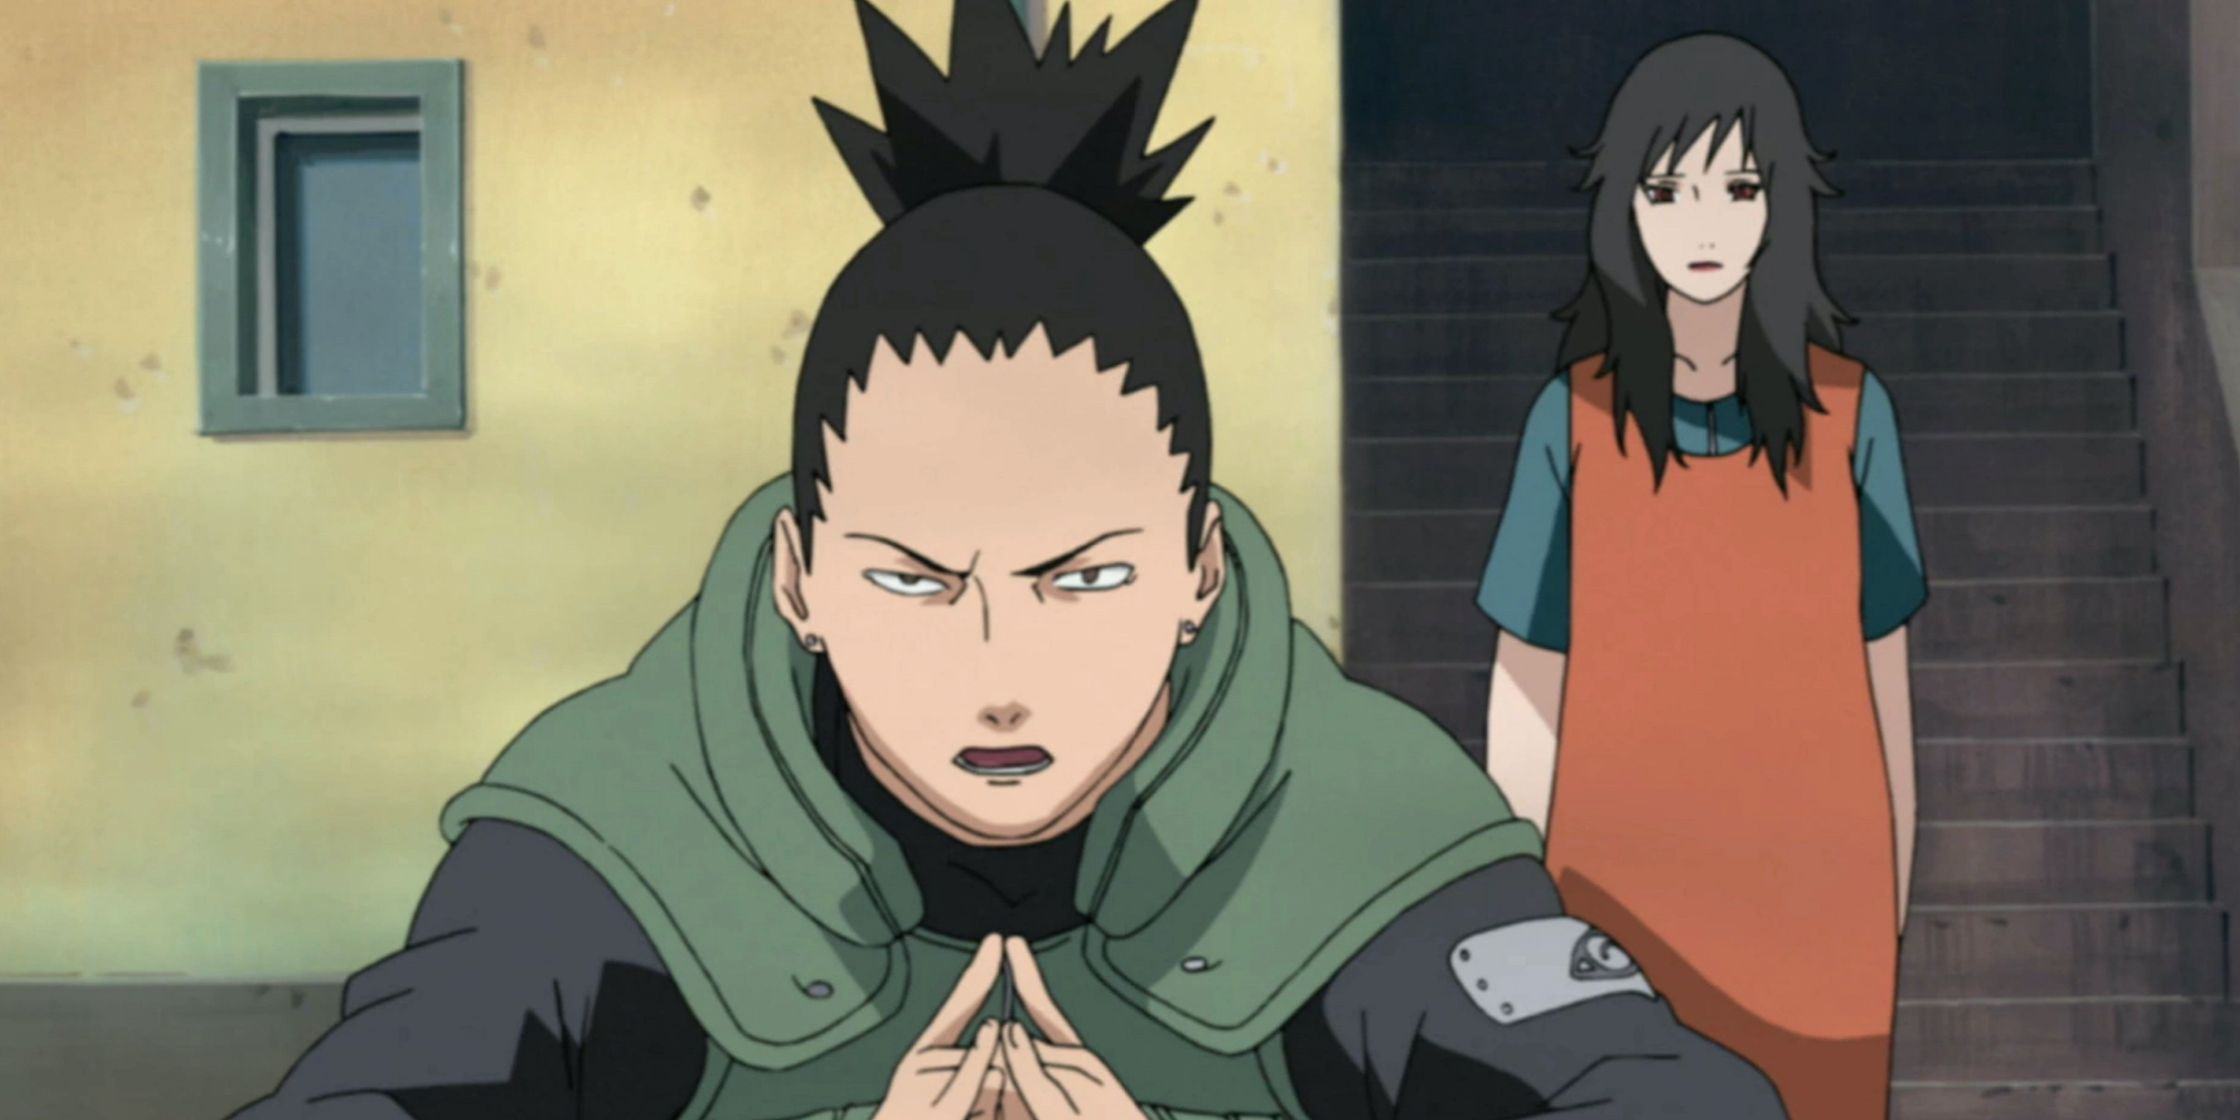 Shikamaru stood in front of the pregnant Kurenai to protect her from Naruto Shippuden's potential attack